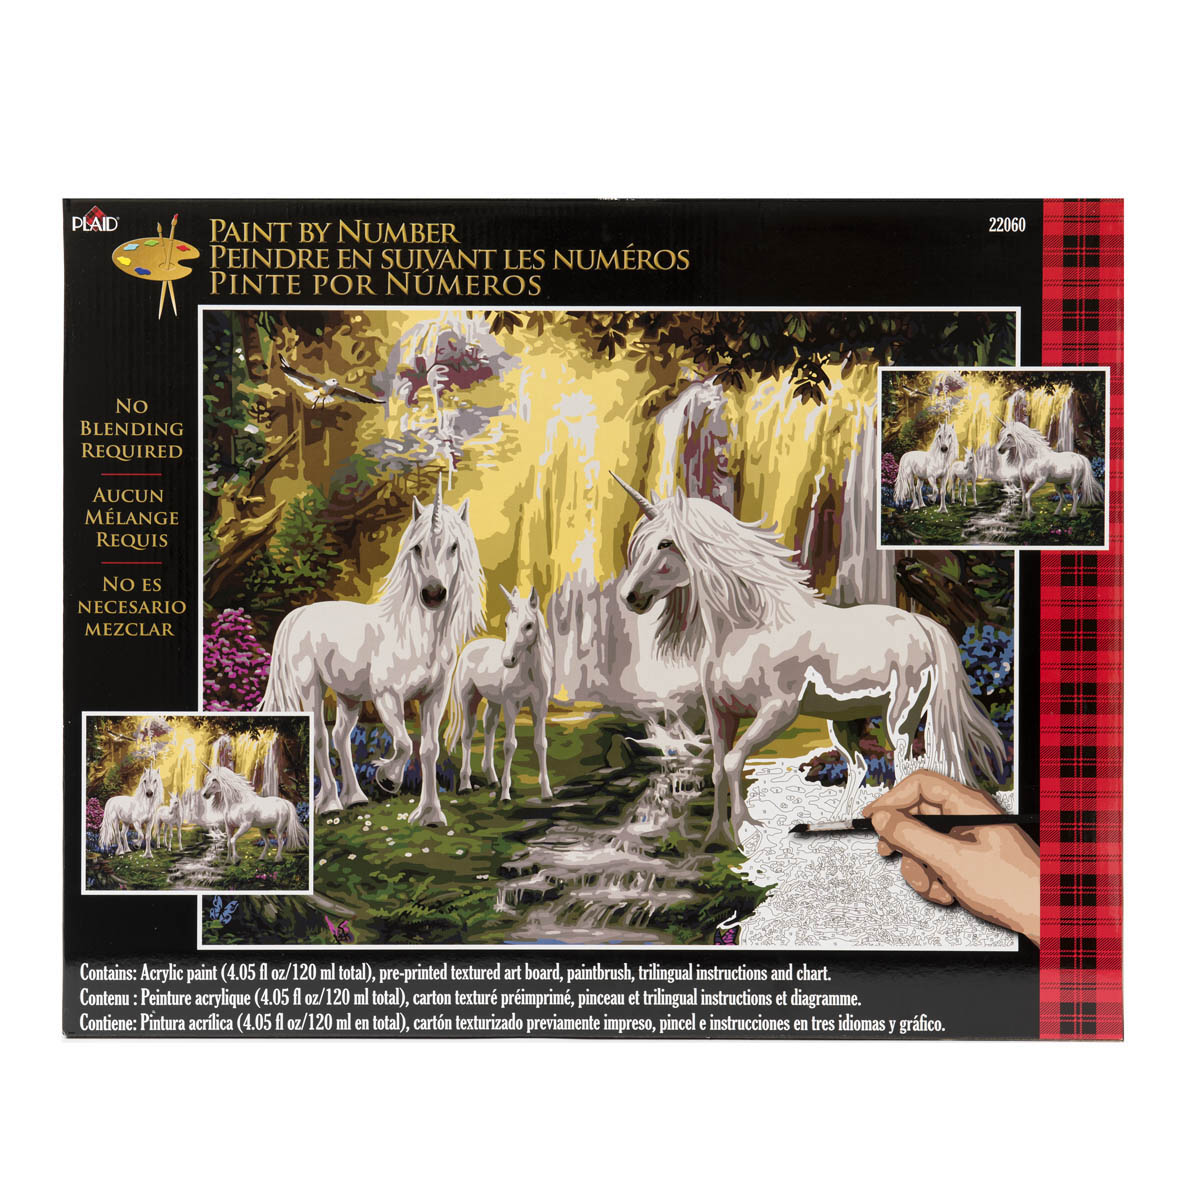 PAINT BY NUMBER - WATERFALL GLADE UNICORNS 1